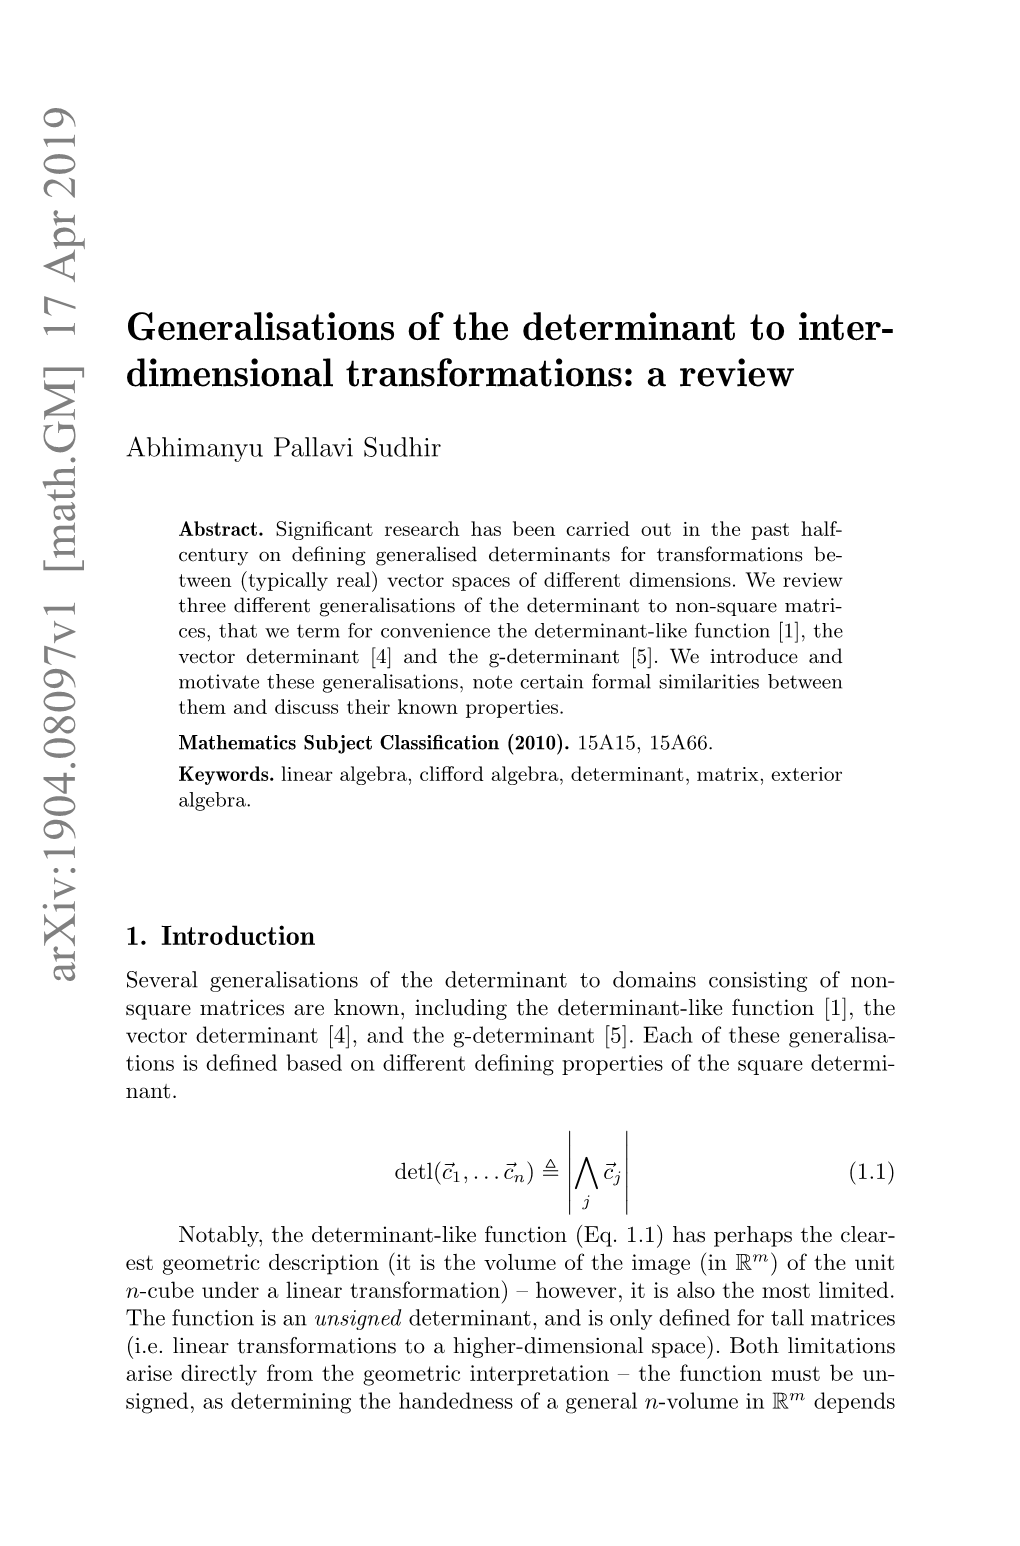 Generalisations of the Determinant to Inter- Dimensional Transformations